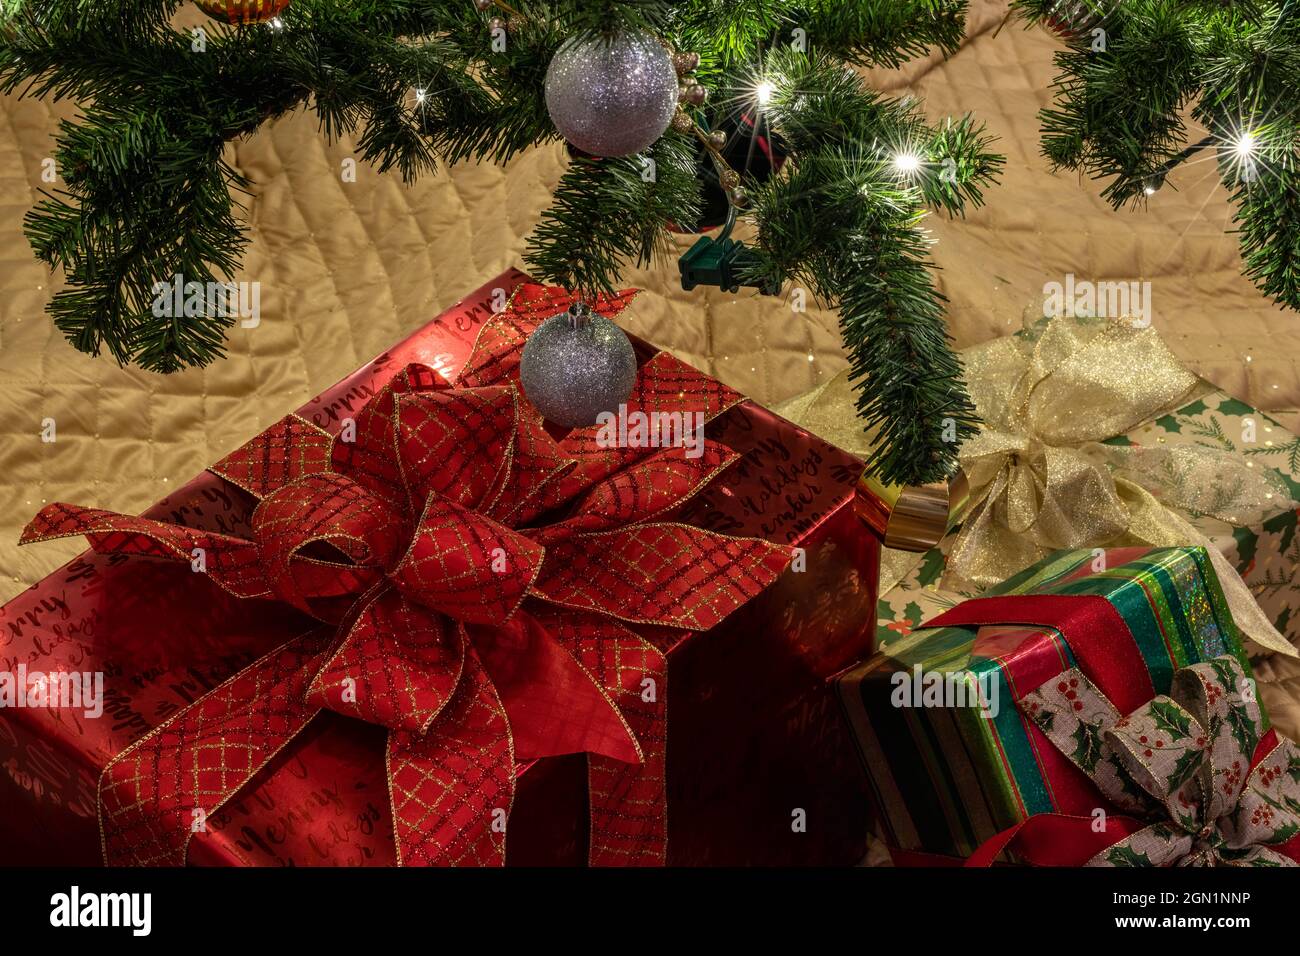 Beautiful packed Christmas gifts under the Christmas tree at home. Holiday concept. Stock Photo